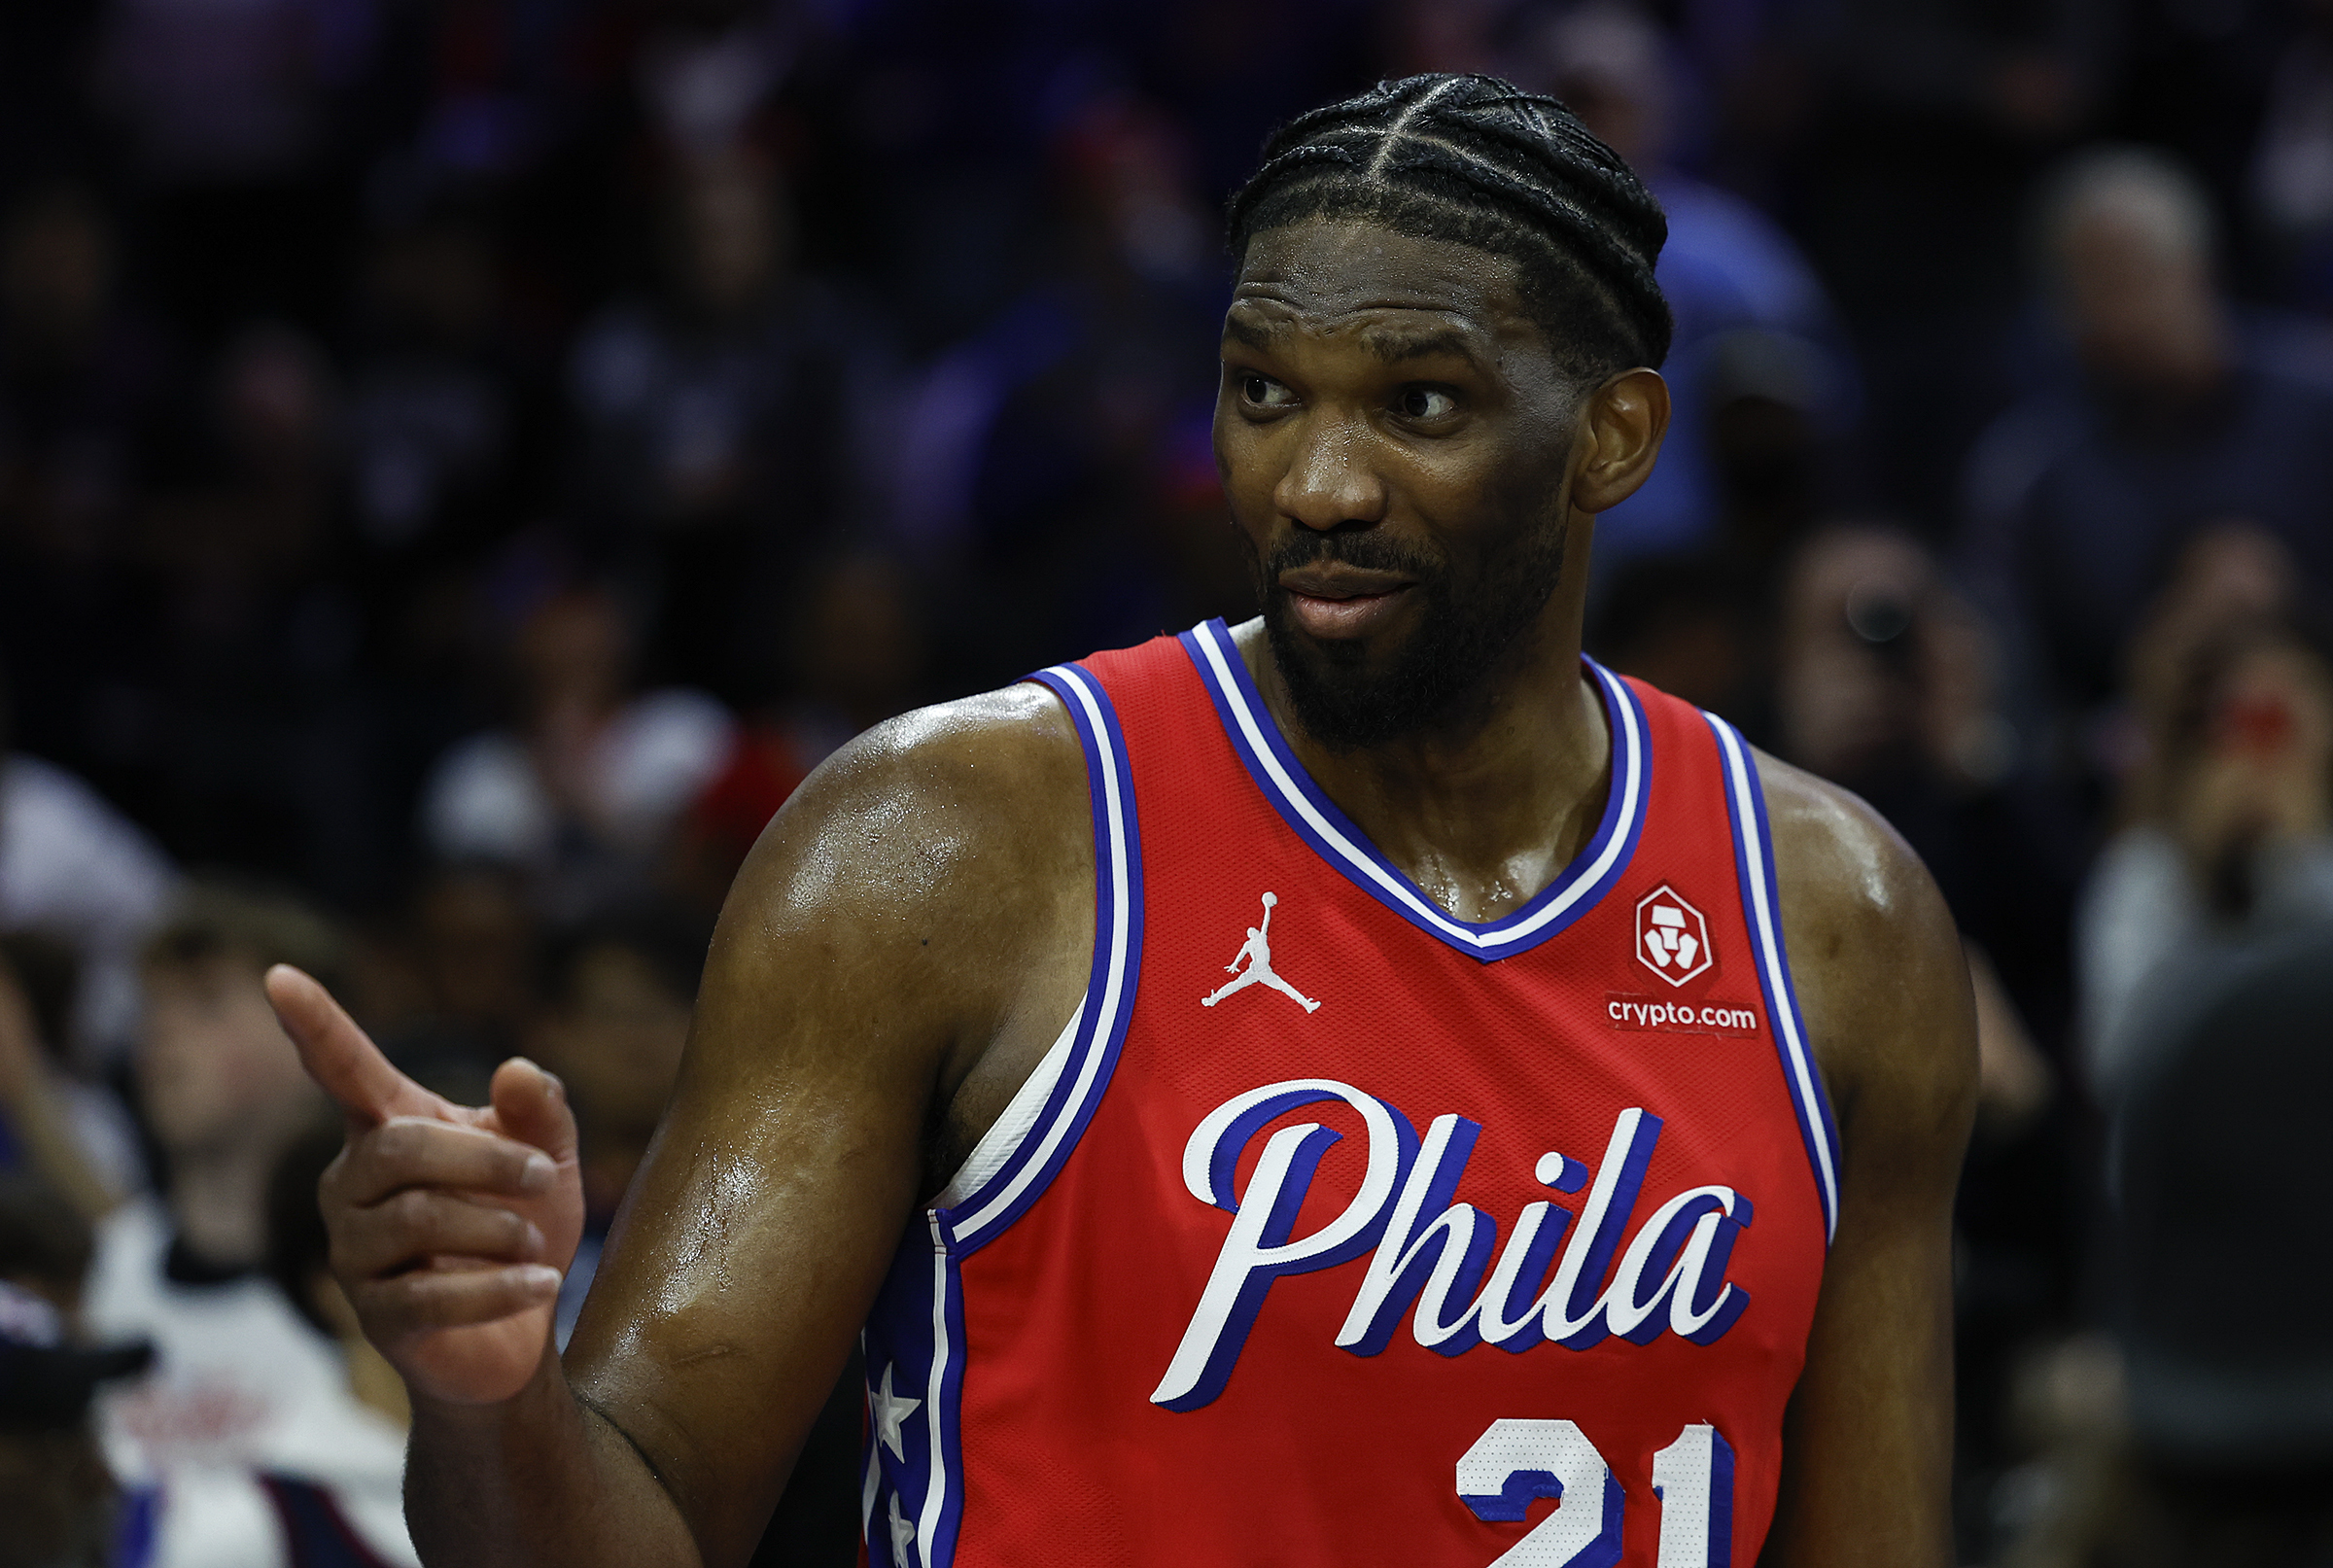 Many Sixers stars of yesteryear have played for Team USA, but Joel Embiid will be one of the rare players to do so as a member of the team in his prime years.